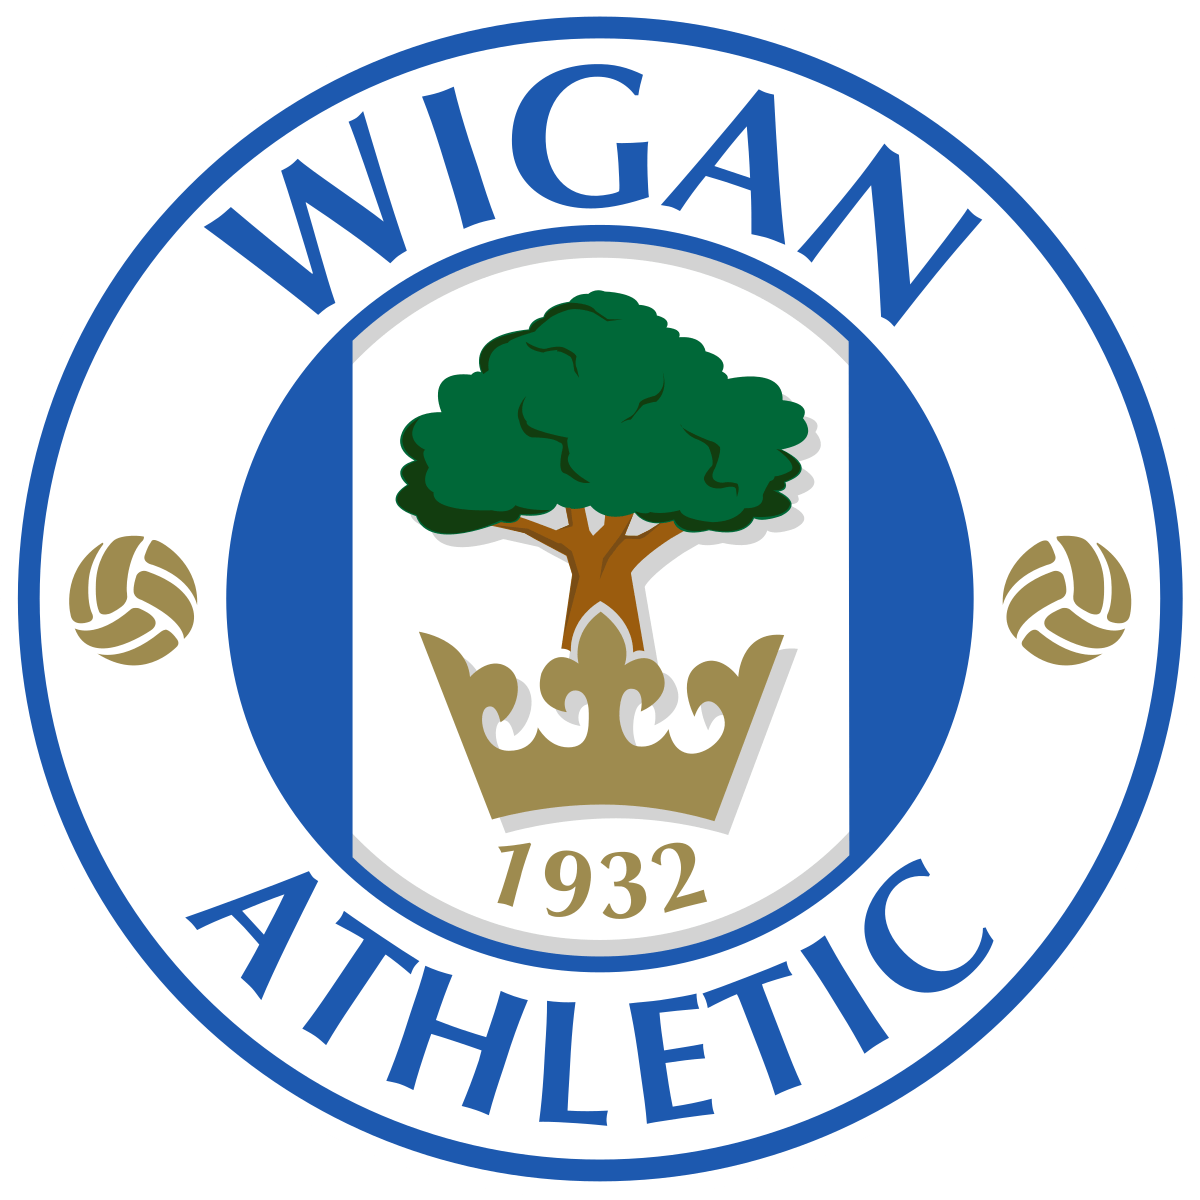 Wigan_Athletic.svg.png